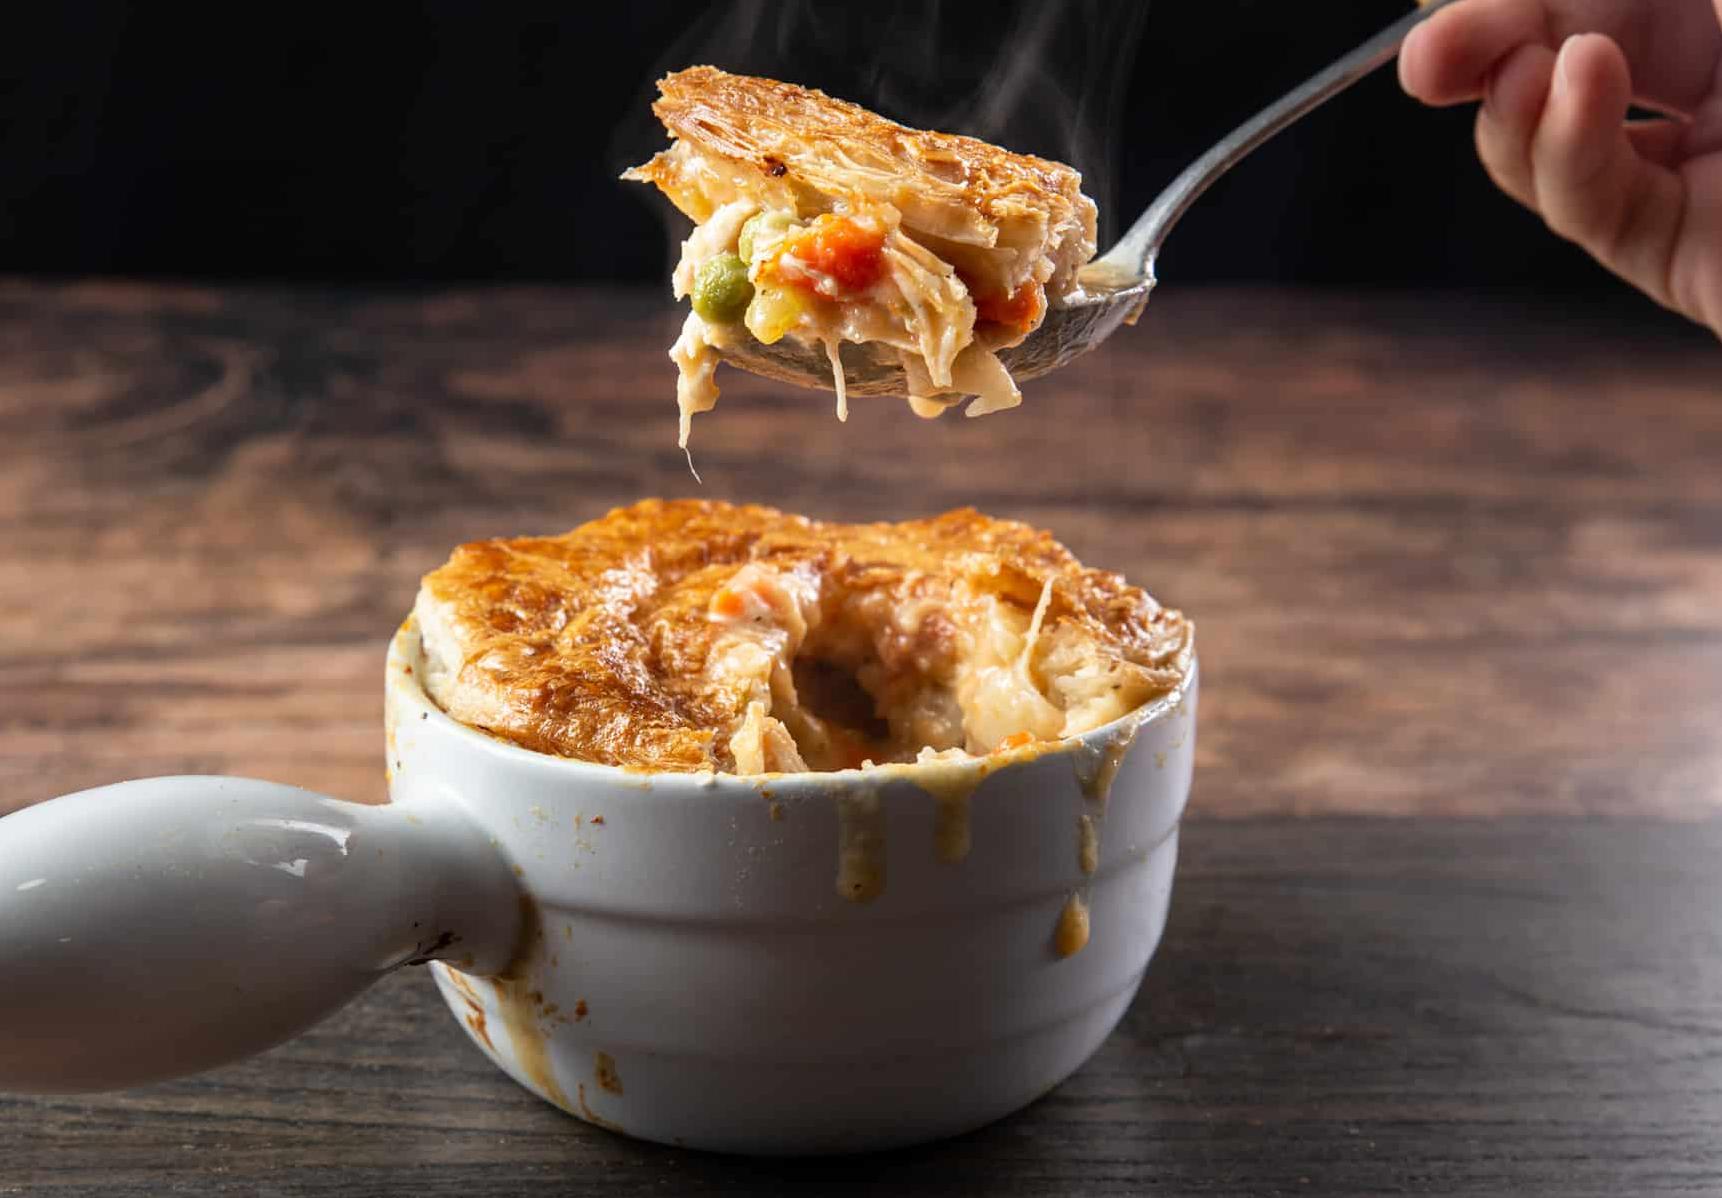  With just a few simple steps, you'll have a homemade pot pie that tastes like it came straight from a five-star restaurant.